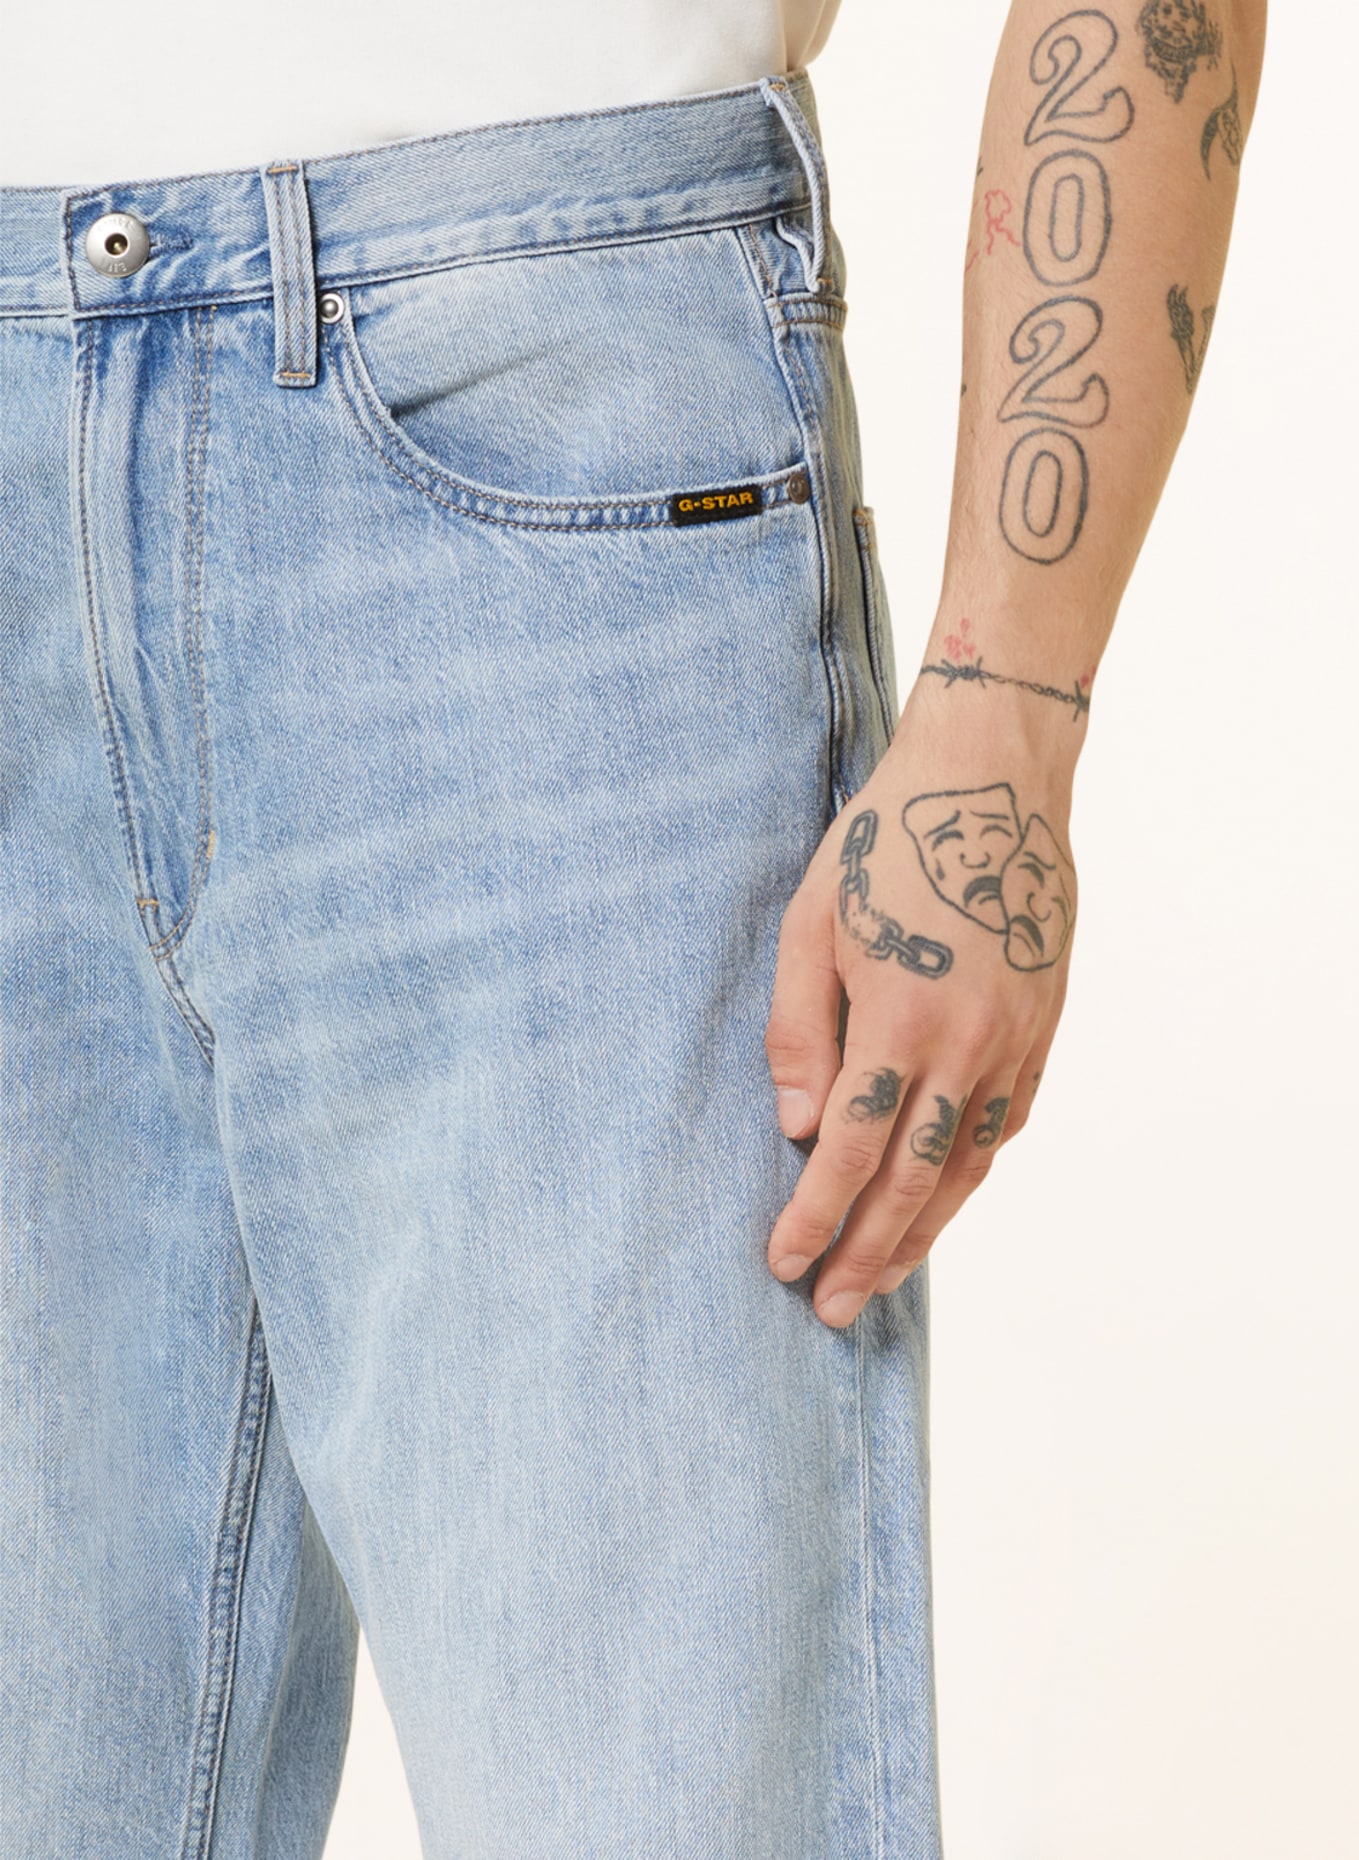 G-Star RAW Jeans TYPE 96 LOOSE relaxed straight fit, Color: G339 sun faded cloudburst (Image 5)